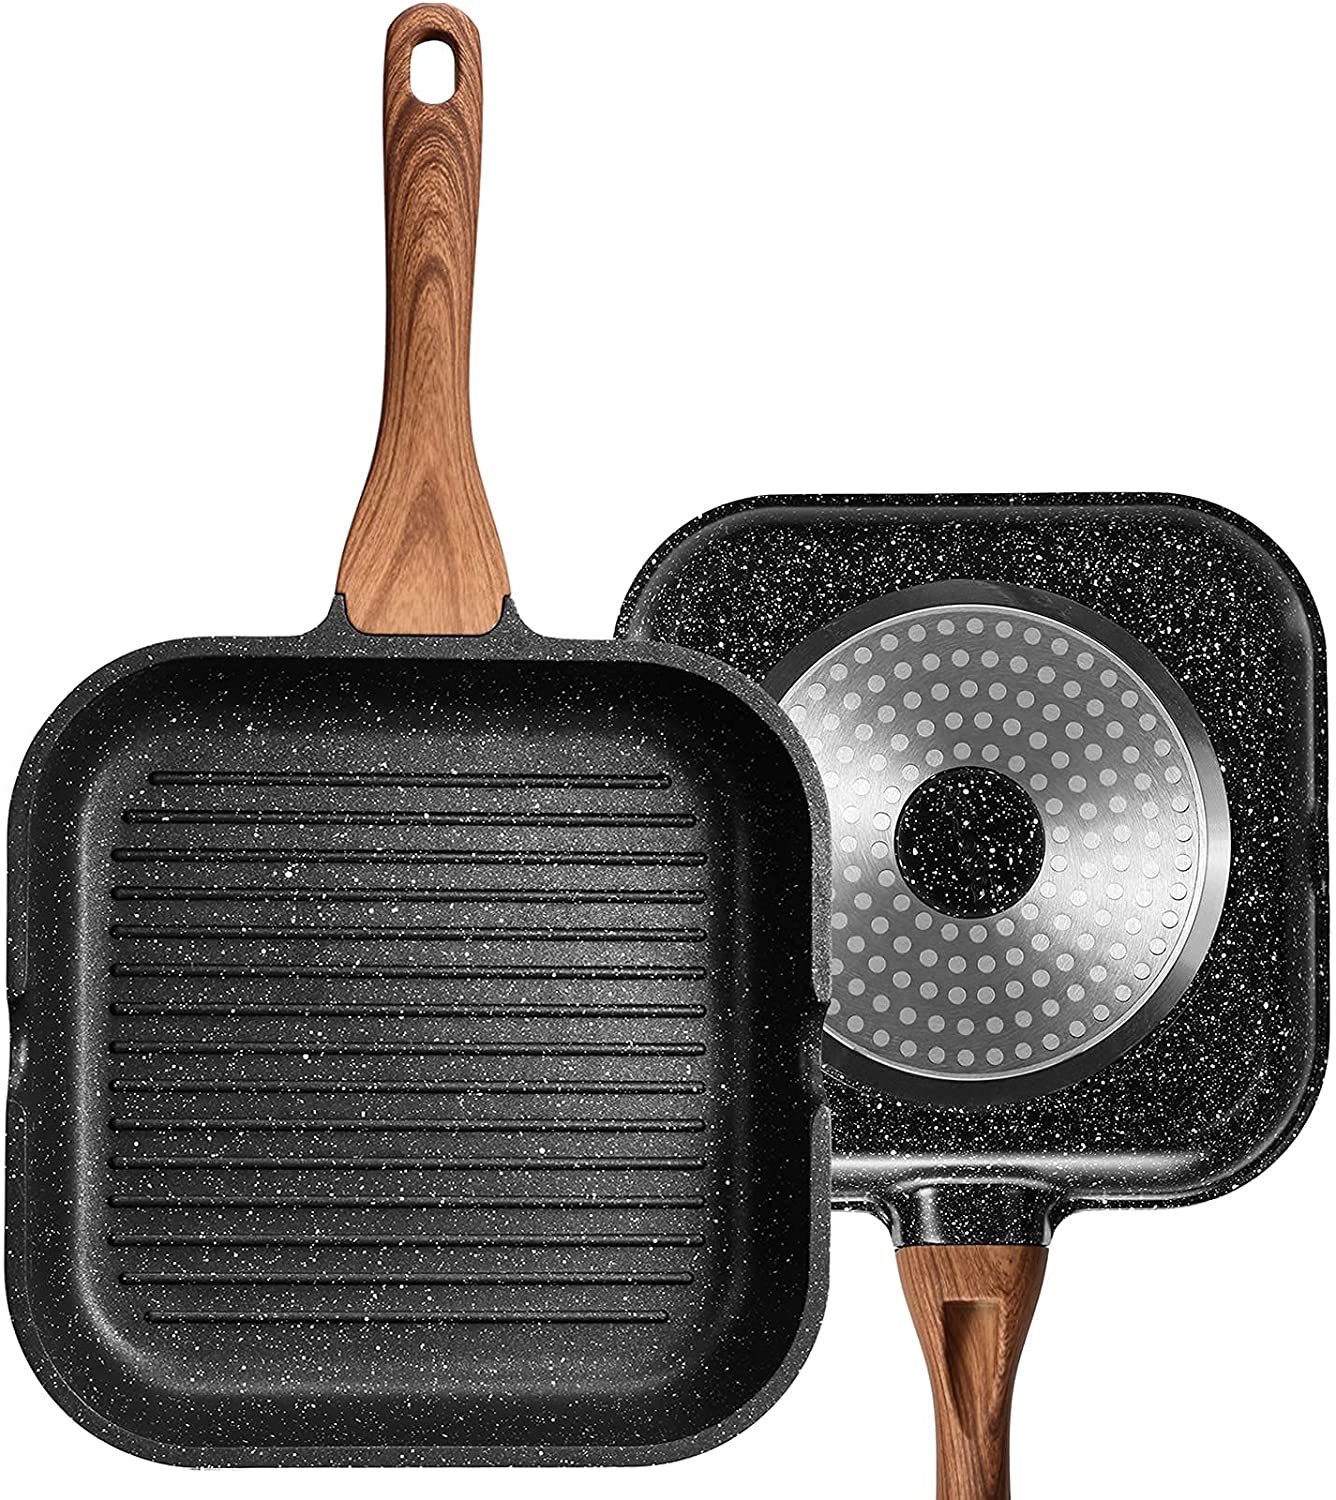 ESLITE LIFE Eco-Friendly Ridged Nonstick Grill Pan, 9.5-Inch